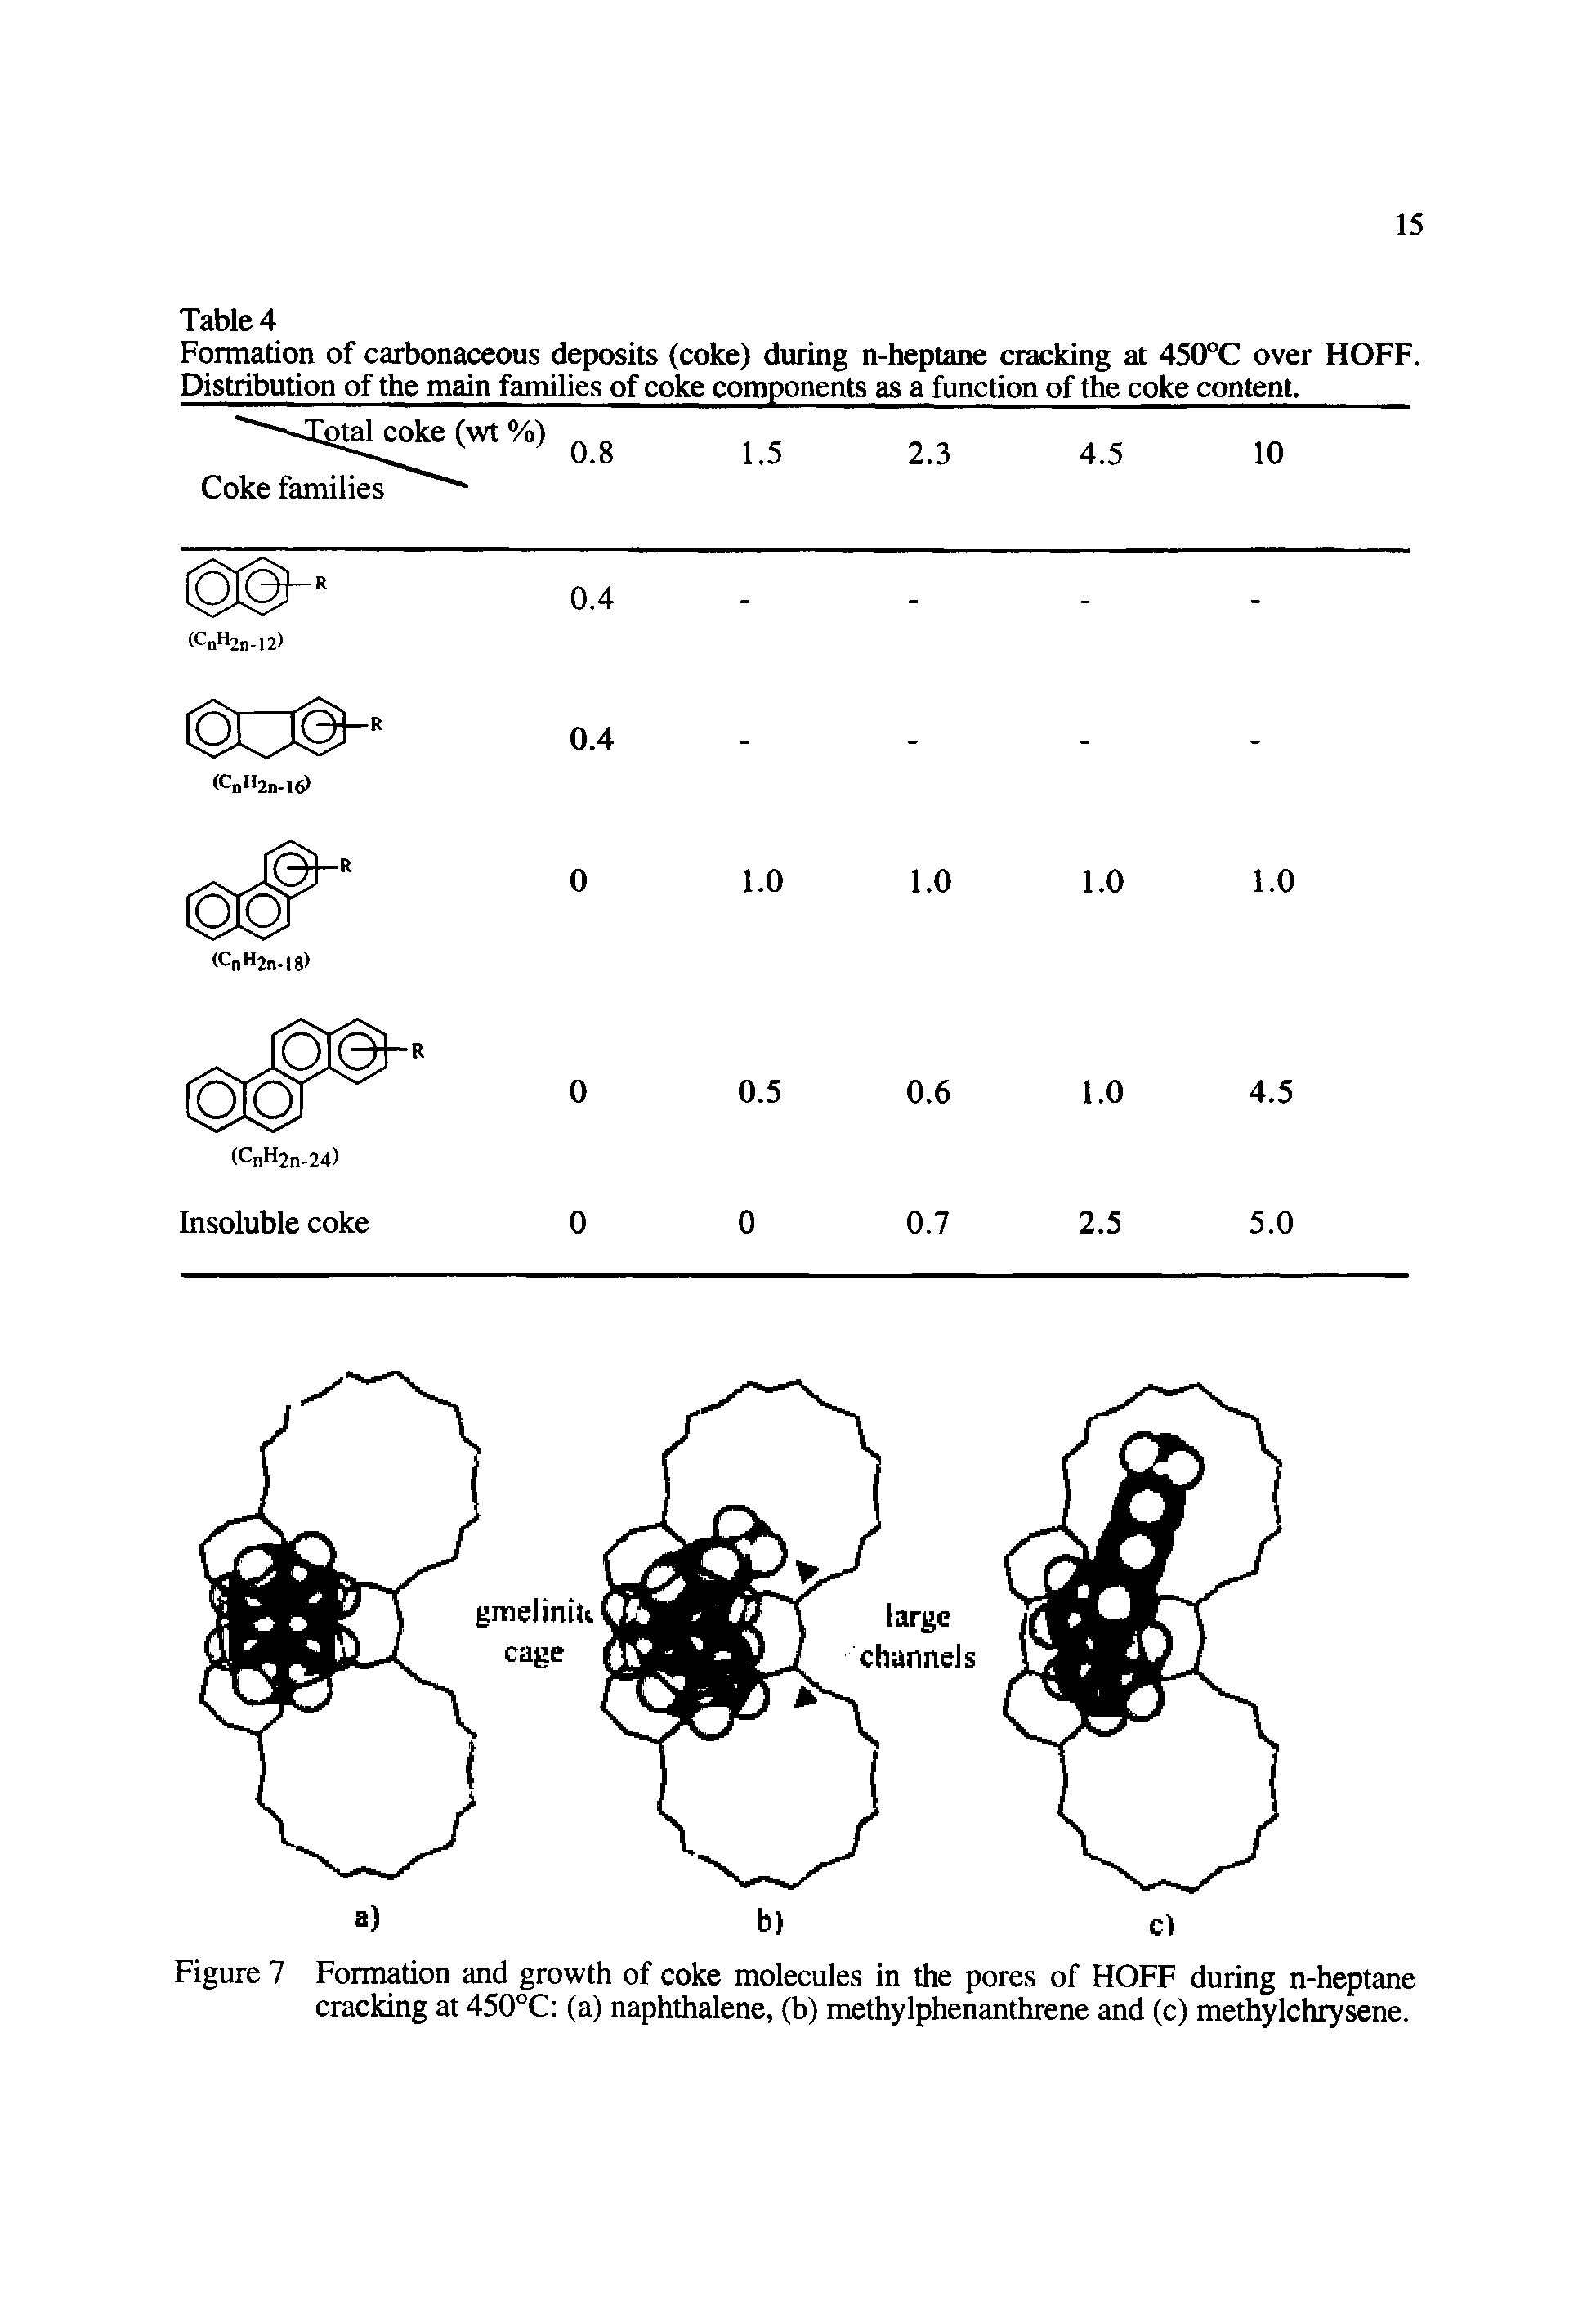 Figure 7 Formation and growth of coke molecules in the pores of HOFF during n-heptane cracking at 450°C (a) naphthalene, (b) methylphenanthrene and (c) methylchrysene.